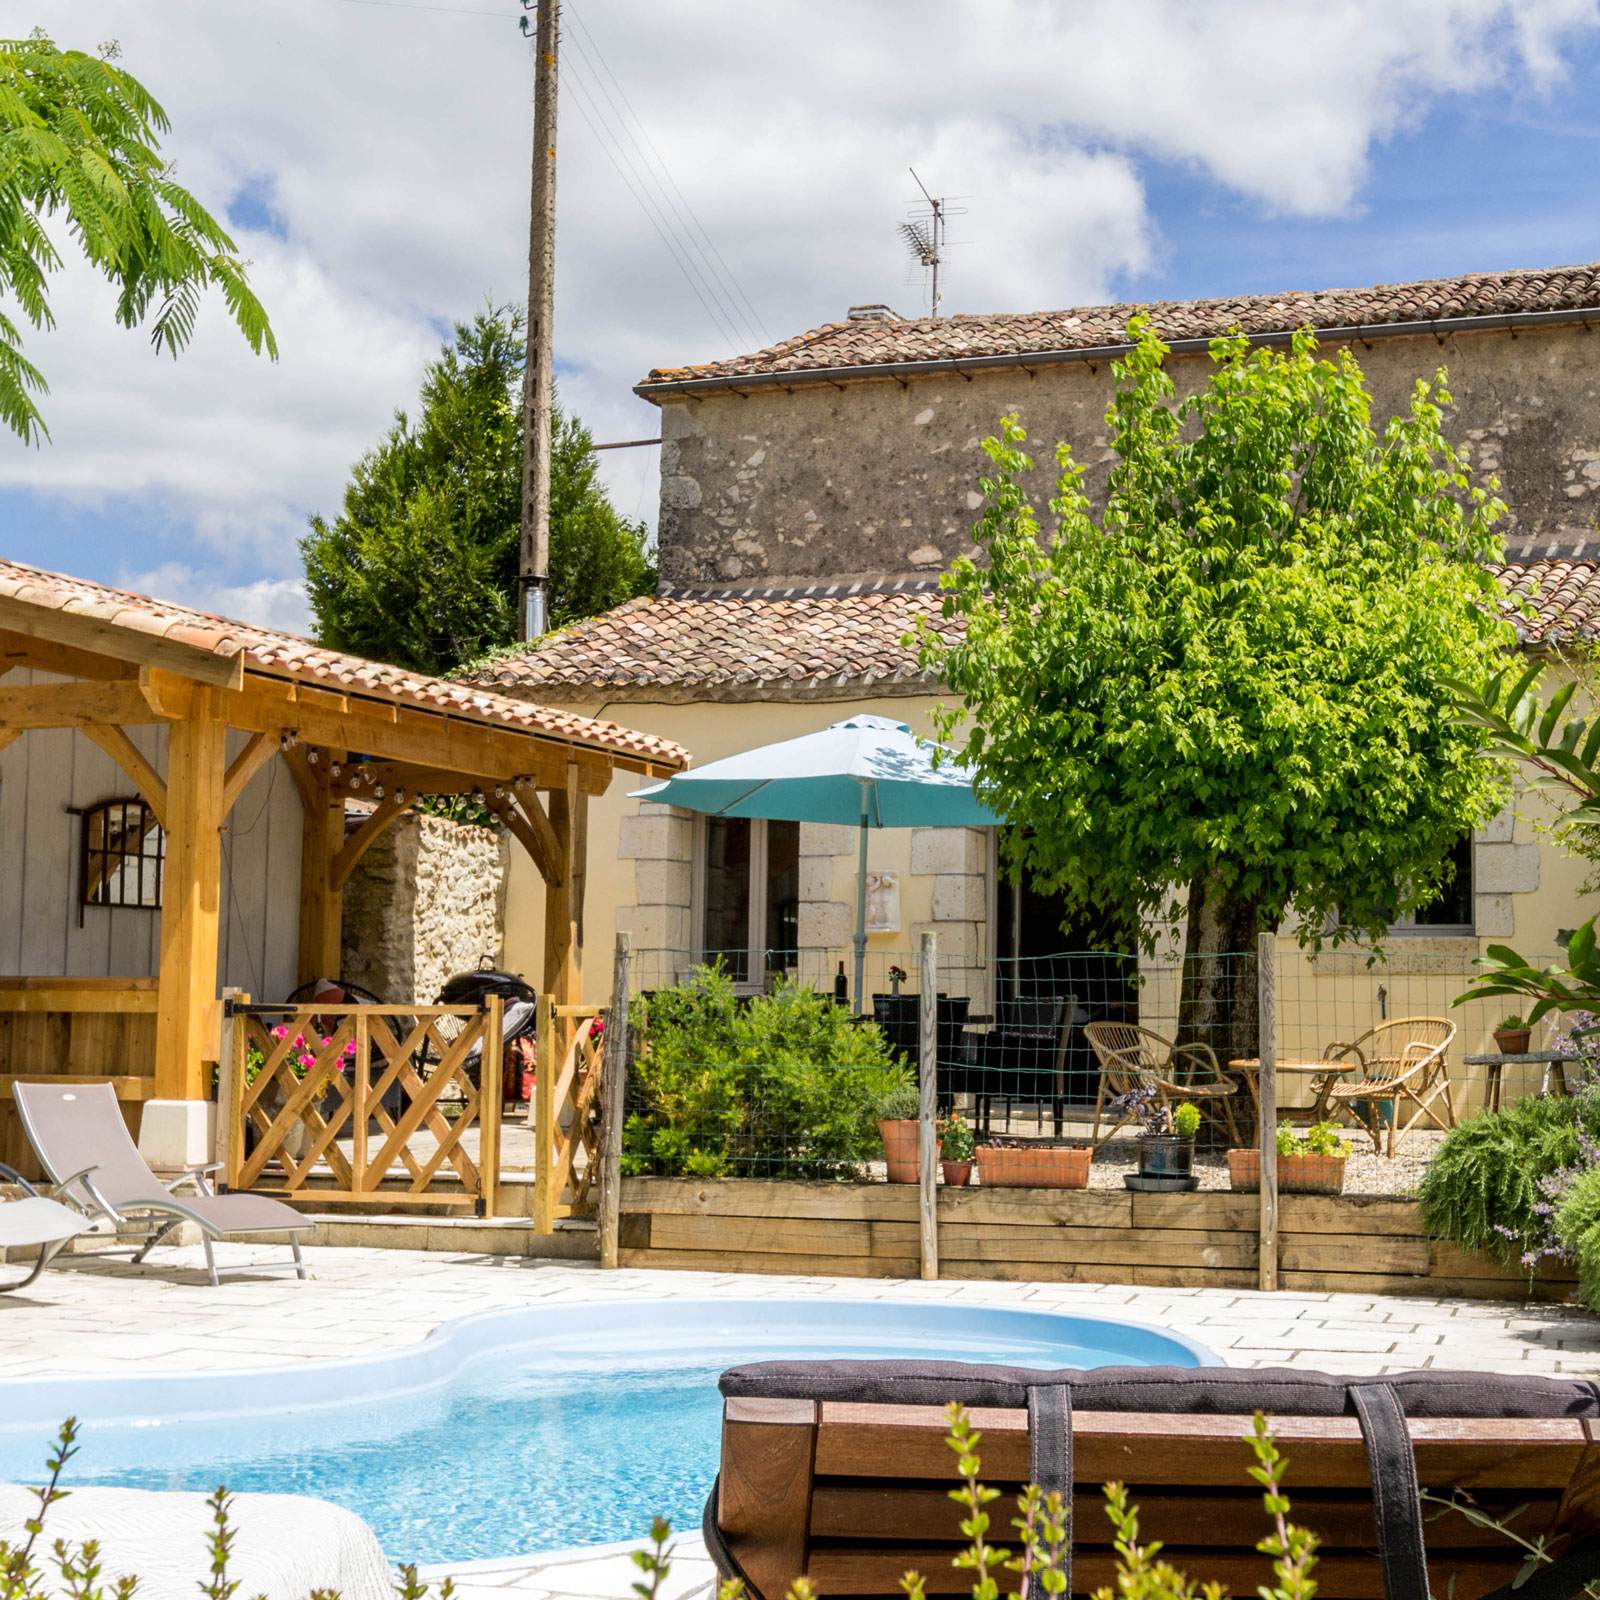 Maison Duras holiday villa sw France in Duras and near monsegur with a pool and garden